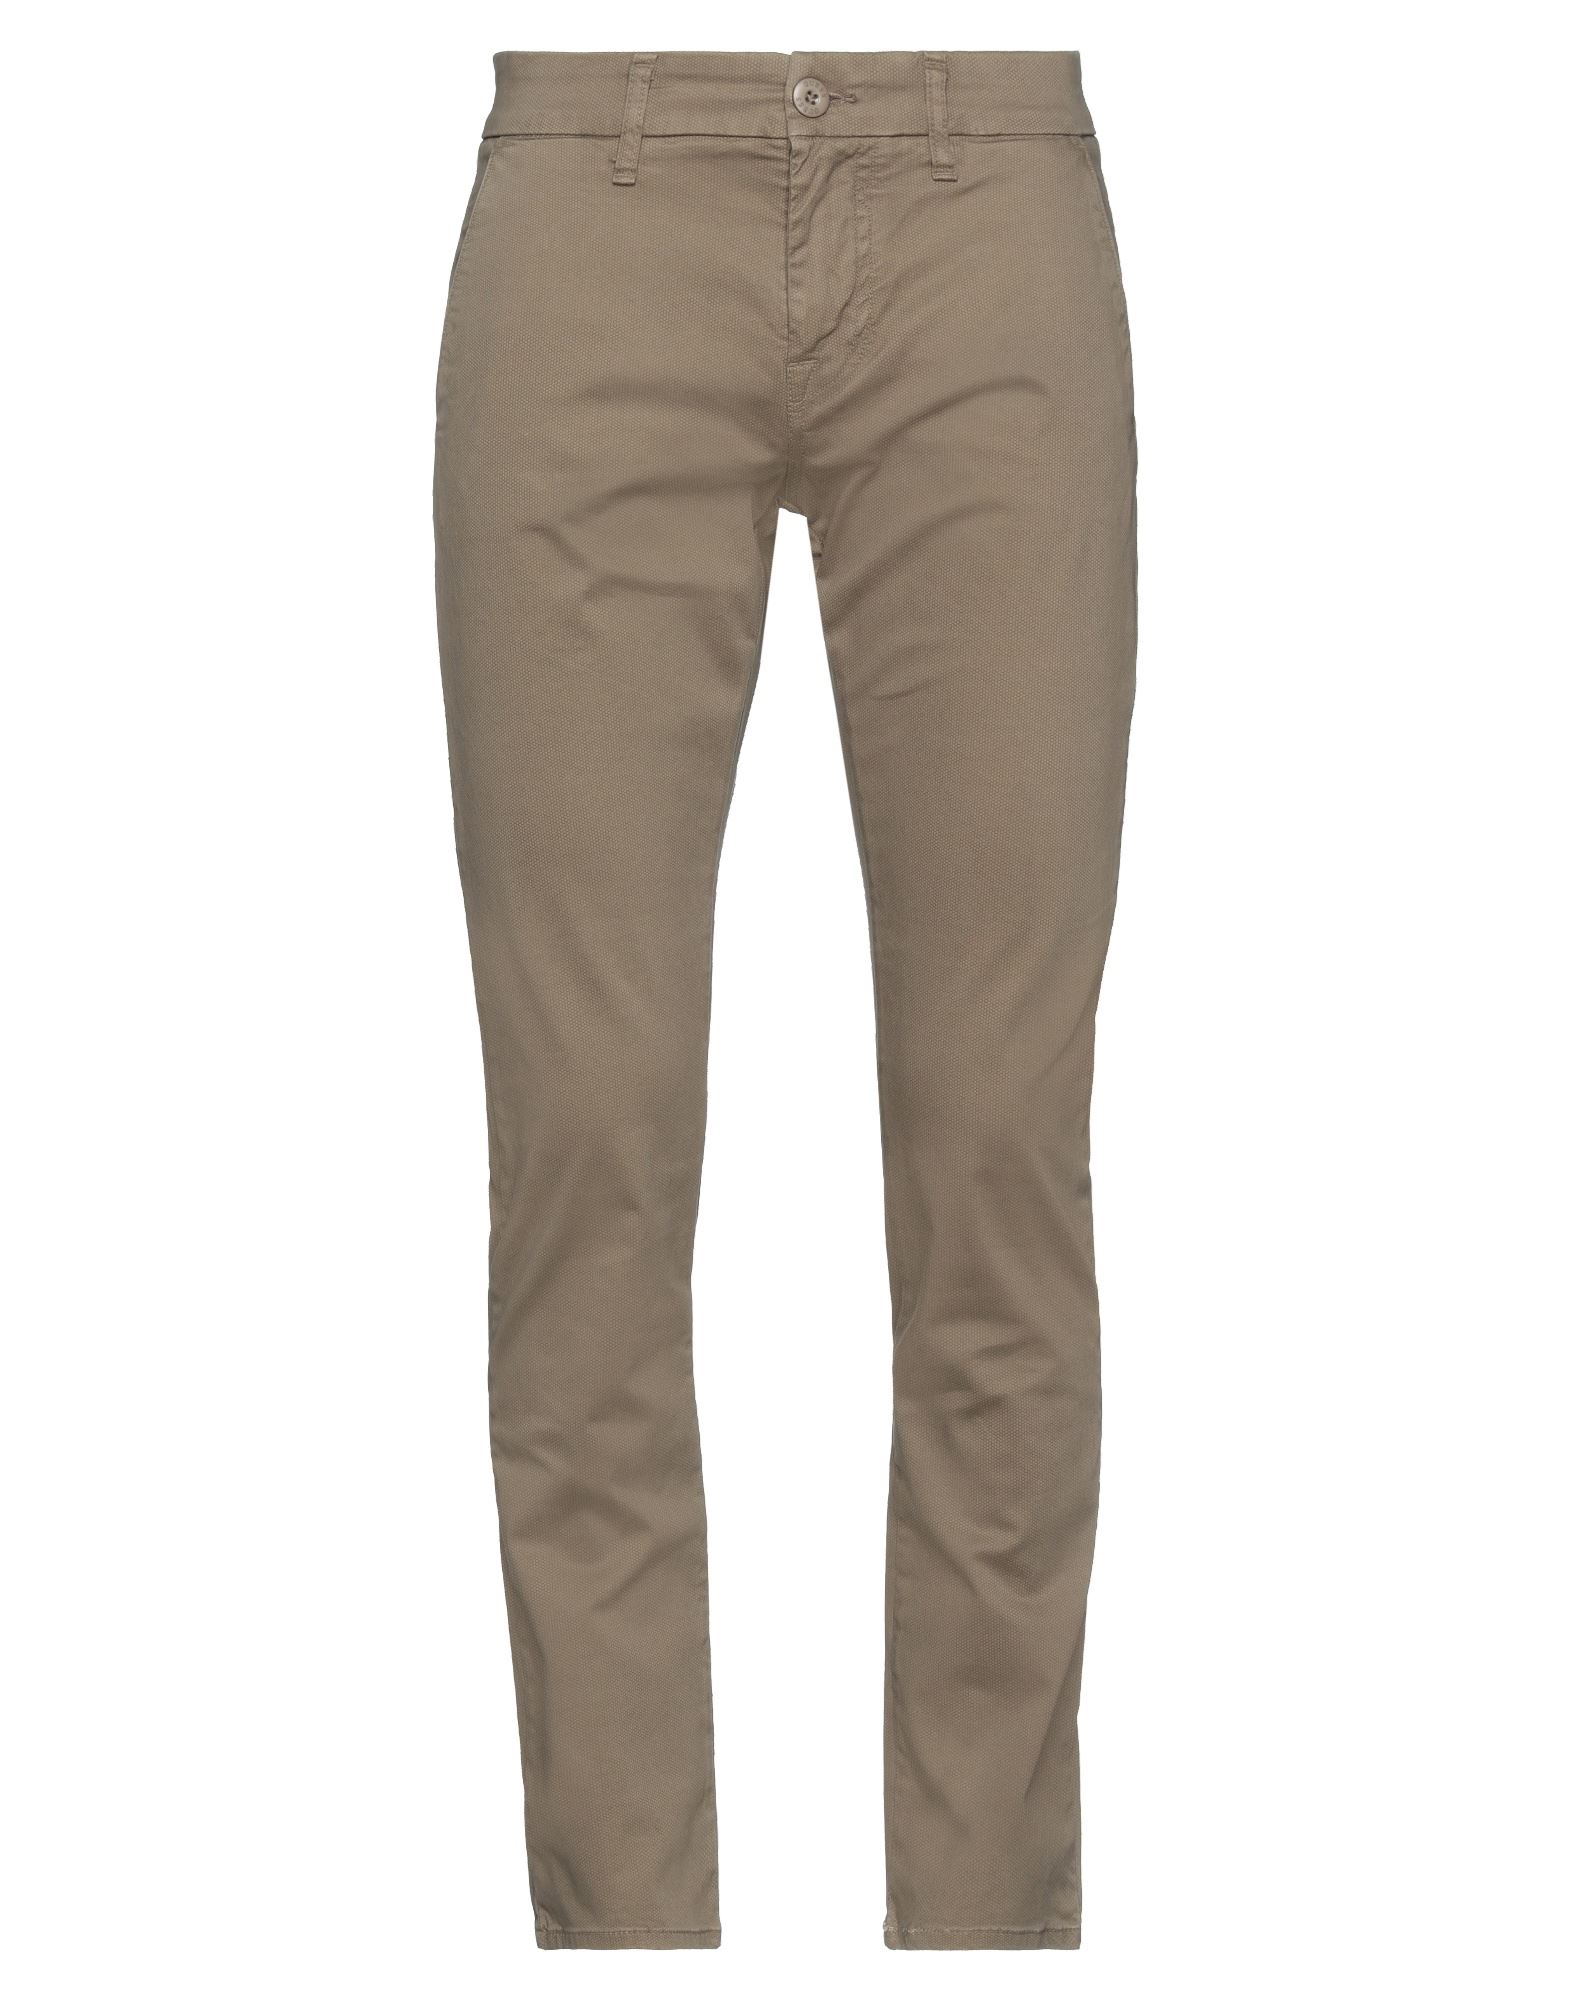 Guess Pants In Light Brown